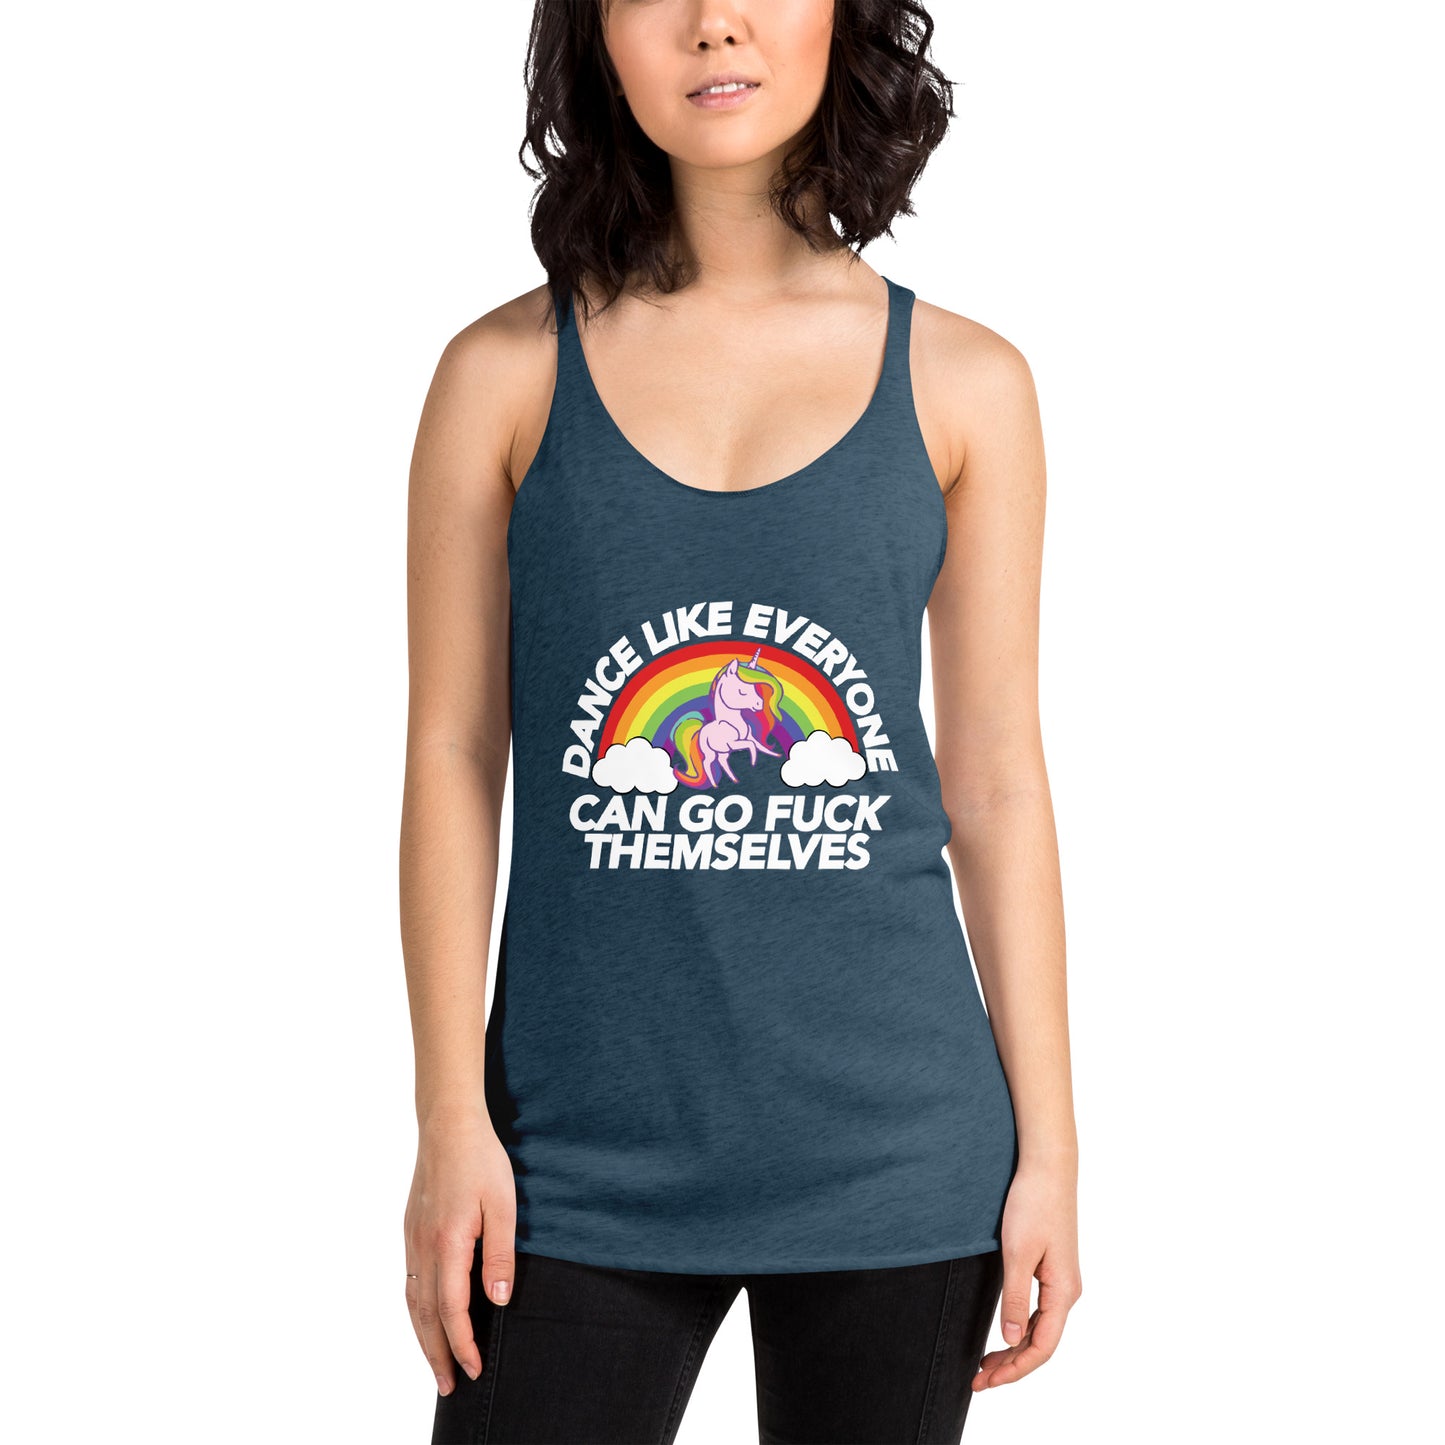 Dance Like Everyone Can Go F**k Themselves - Women's Racerback Tank